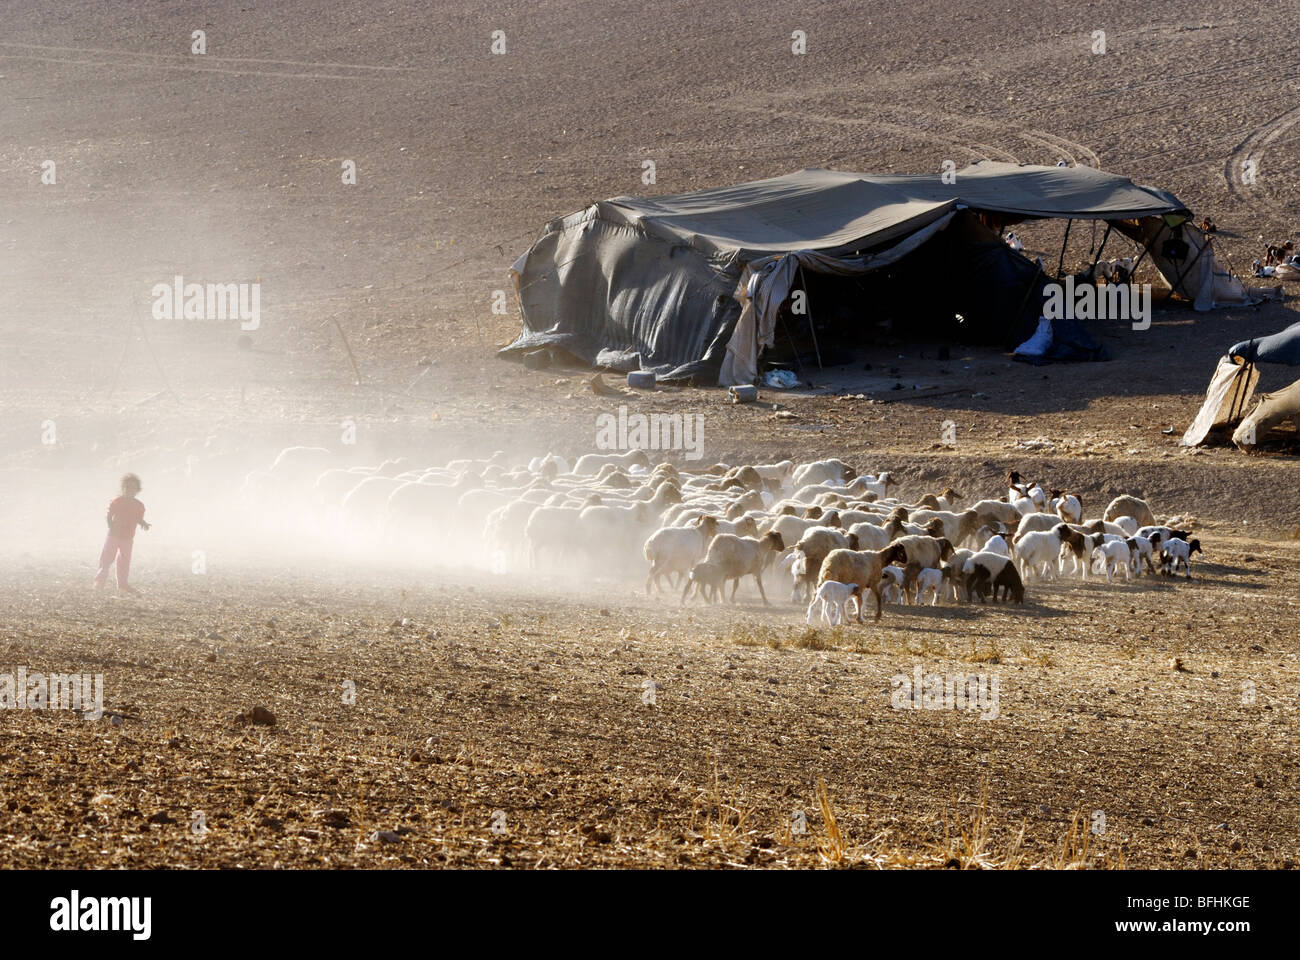 Israel, Negev Desert, Bedouin tent surrounded by a herd of sheep Stock Photo